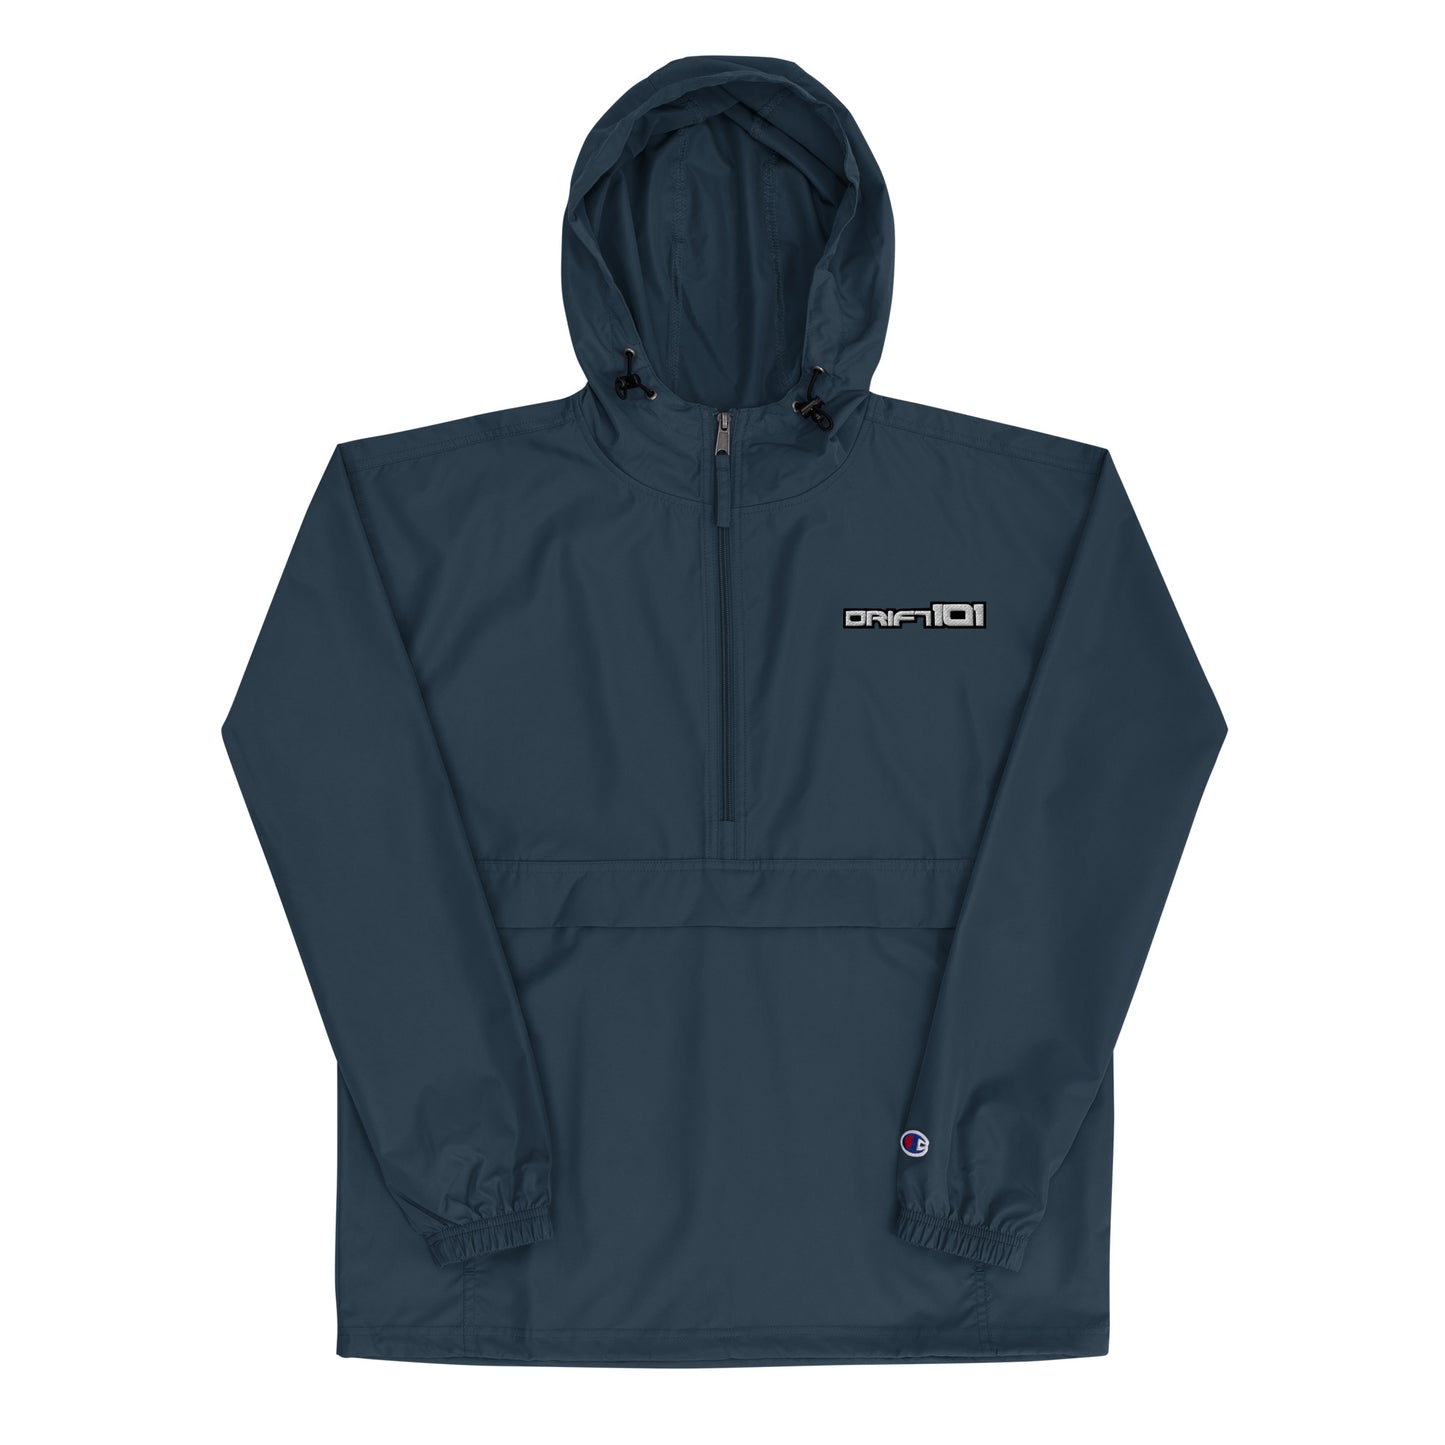 Drift 101 Champion Packable Windbreaker (Embroidered)